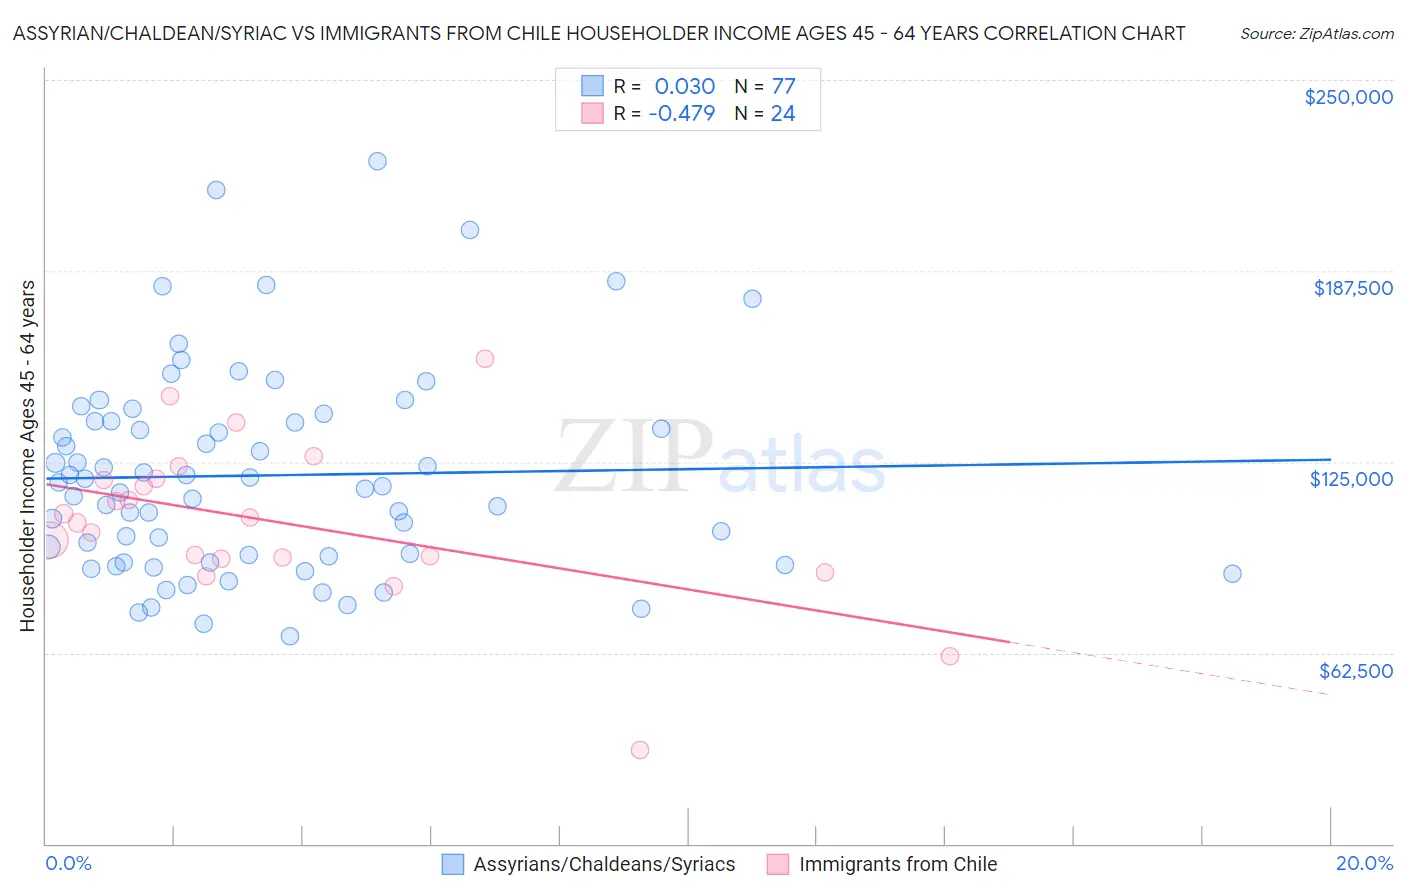 Assyrian/Chaldean/Syriac vs Immigrants from Chile Householder Income Ages 45 - 64 years